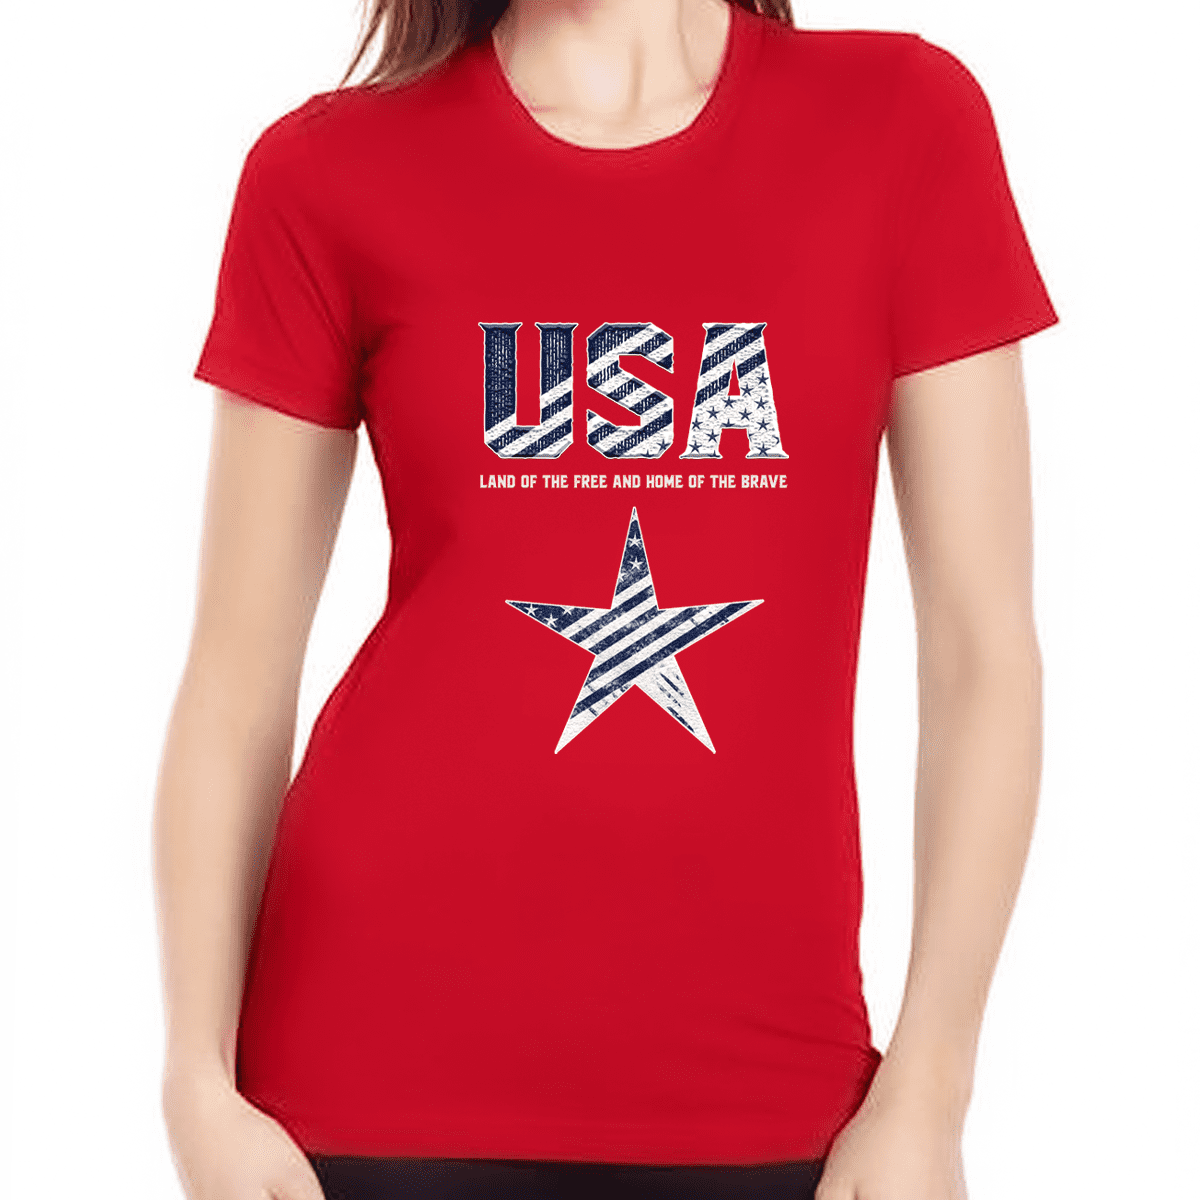 Fourth of July Shirts for Women - 4th of July Shirts for Women - Fourth of July Clothes for 